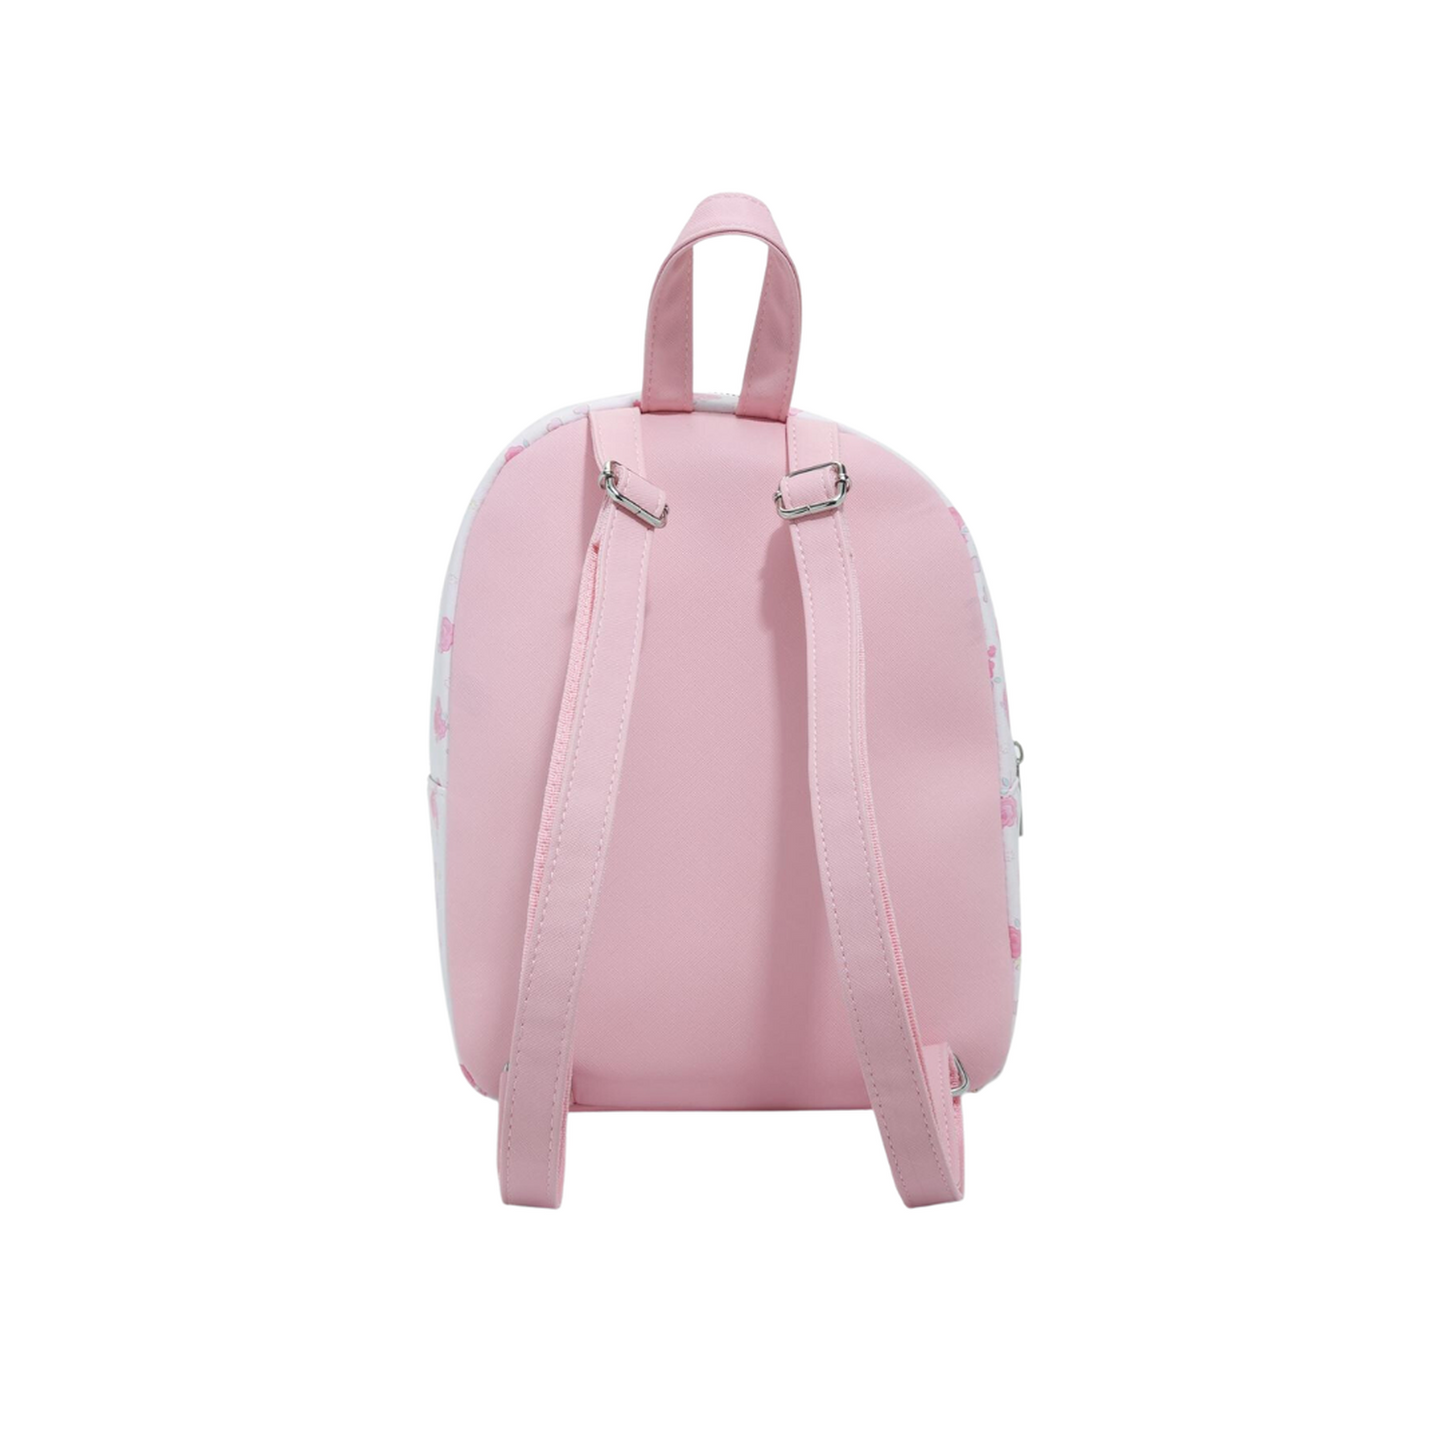 My Melody Pastel Rose Mini Backpack